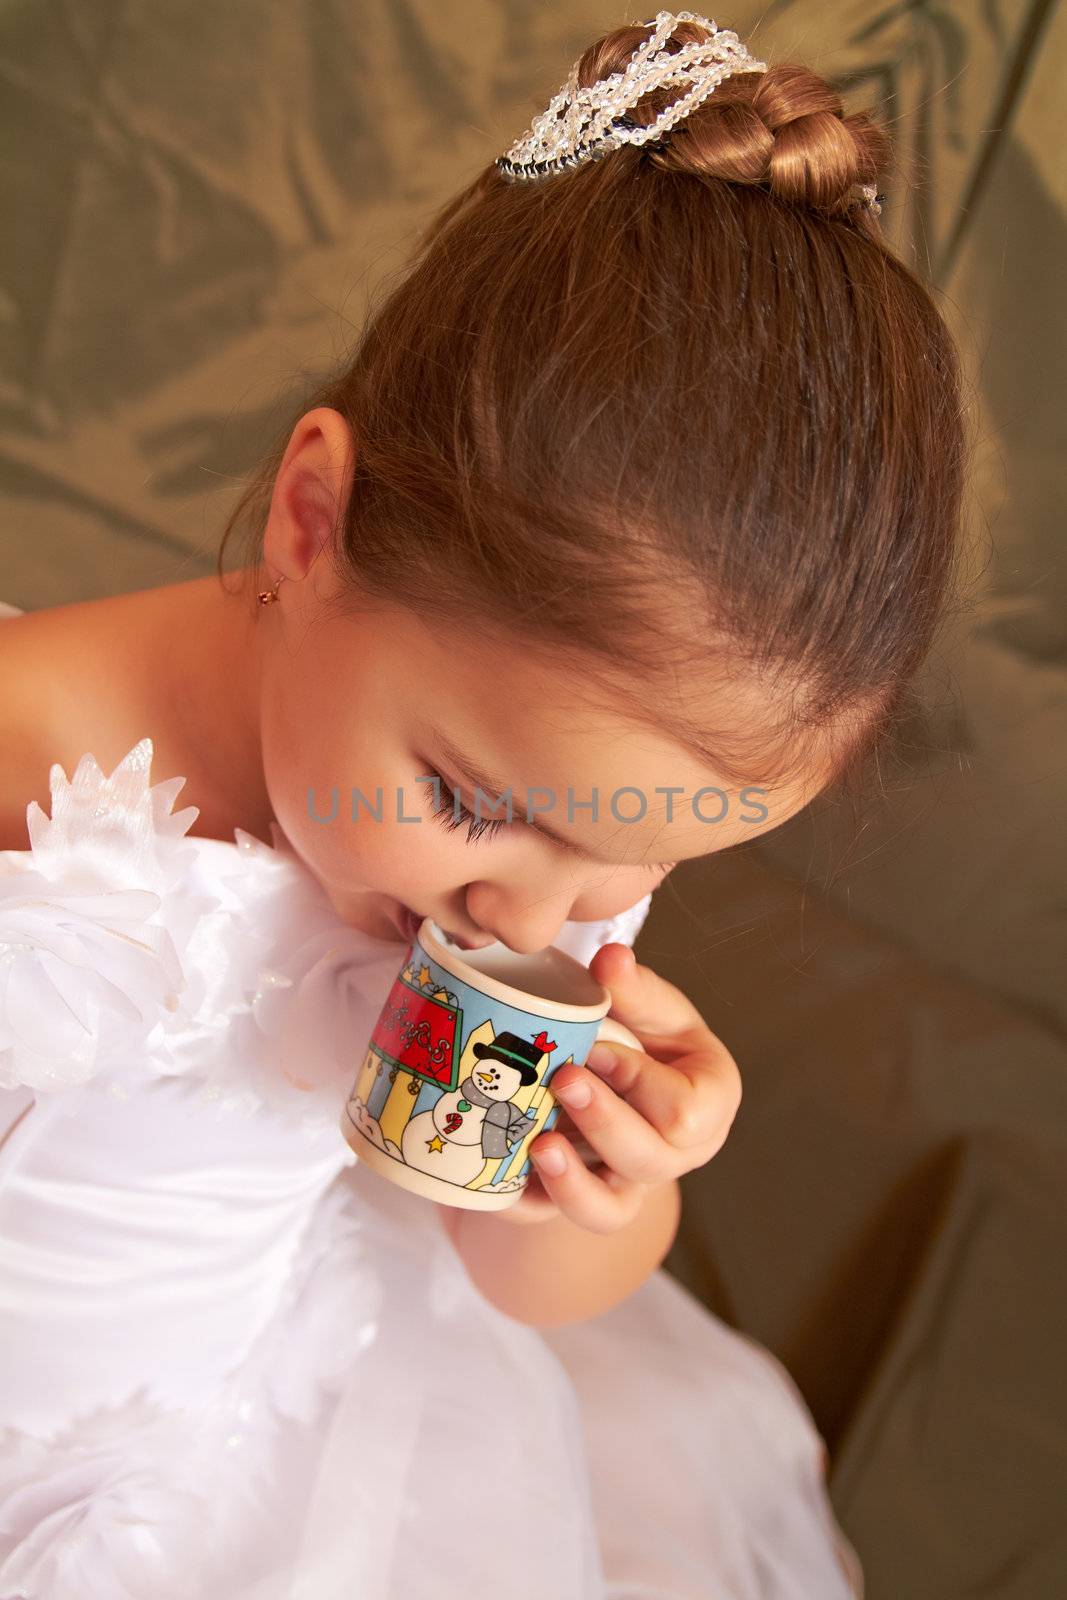 The little girl in a white dress drinks from a small cup.